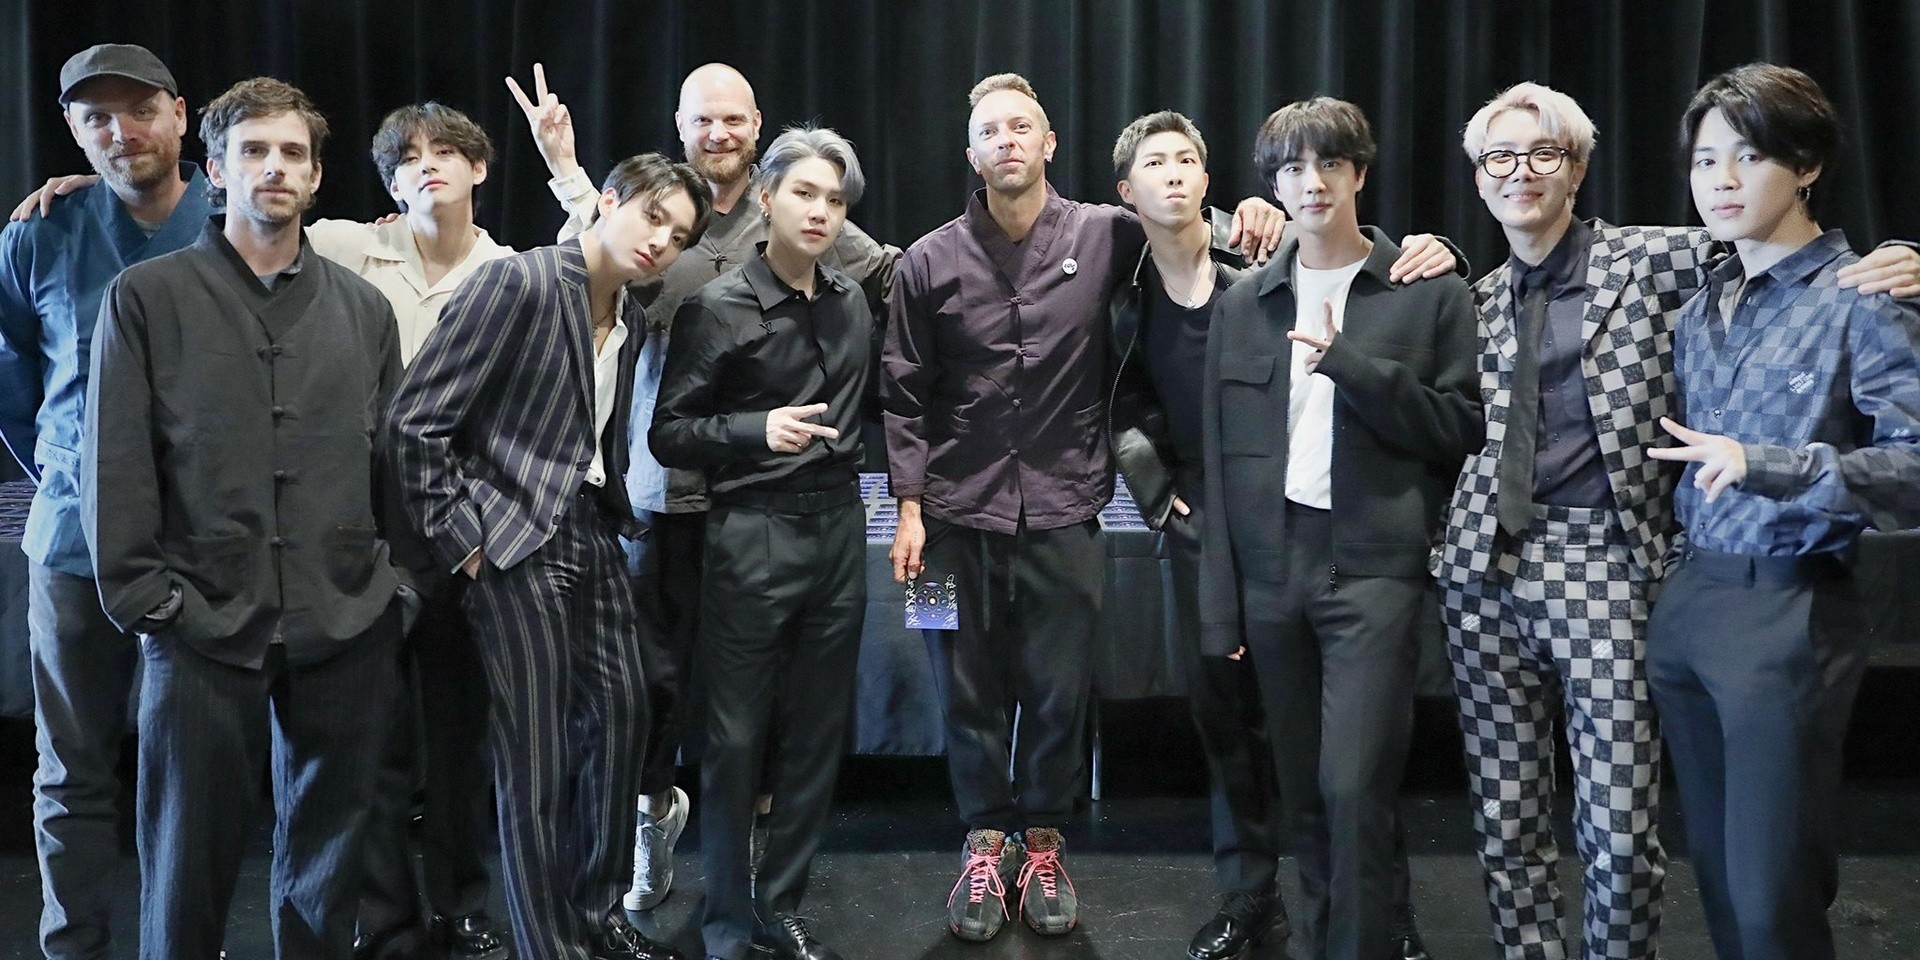 Coldplay and BTS unveil a constellation of wonder in their new collaborative single 'My Universe'  – listen